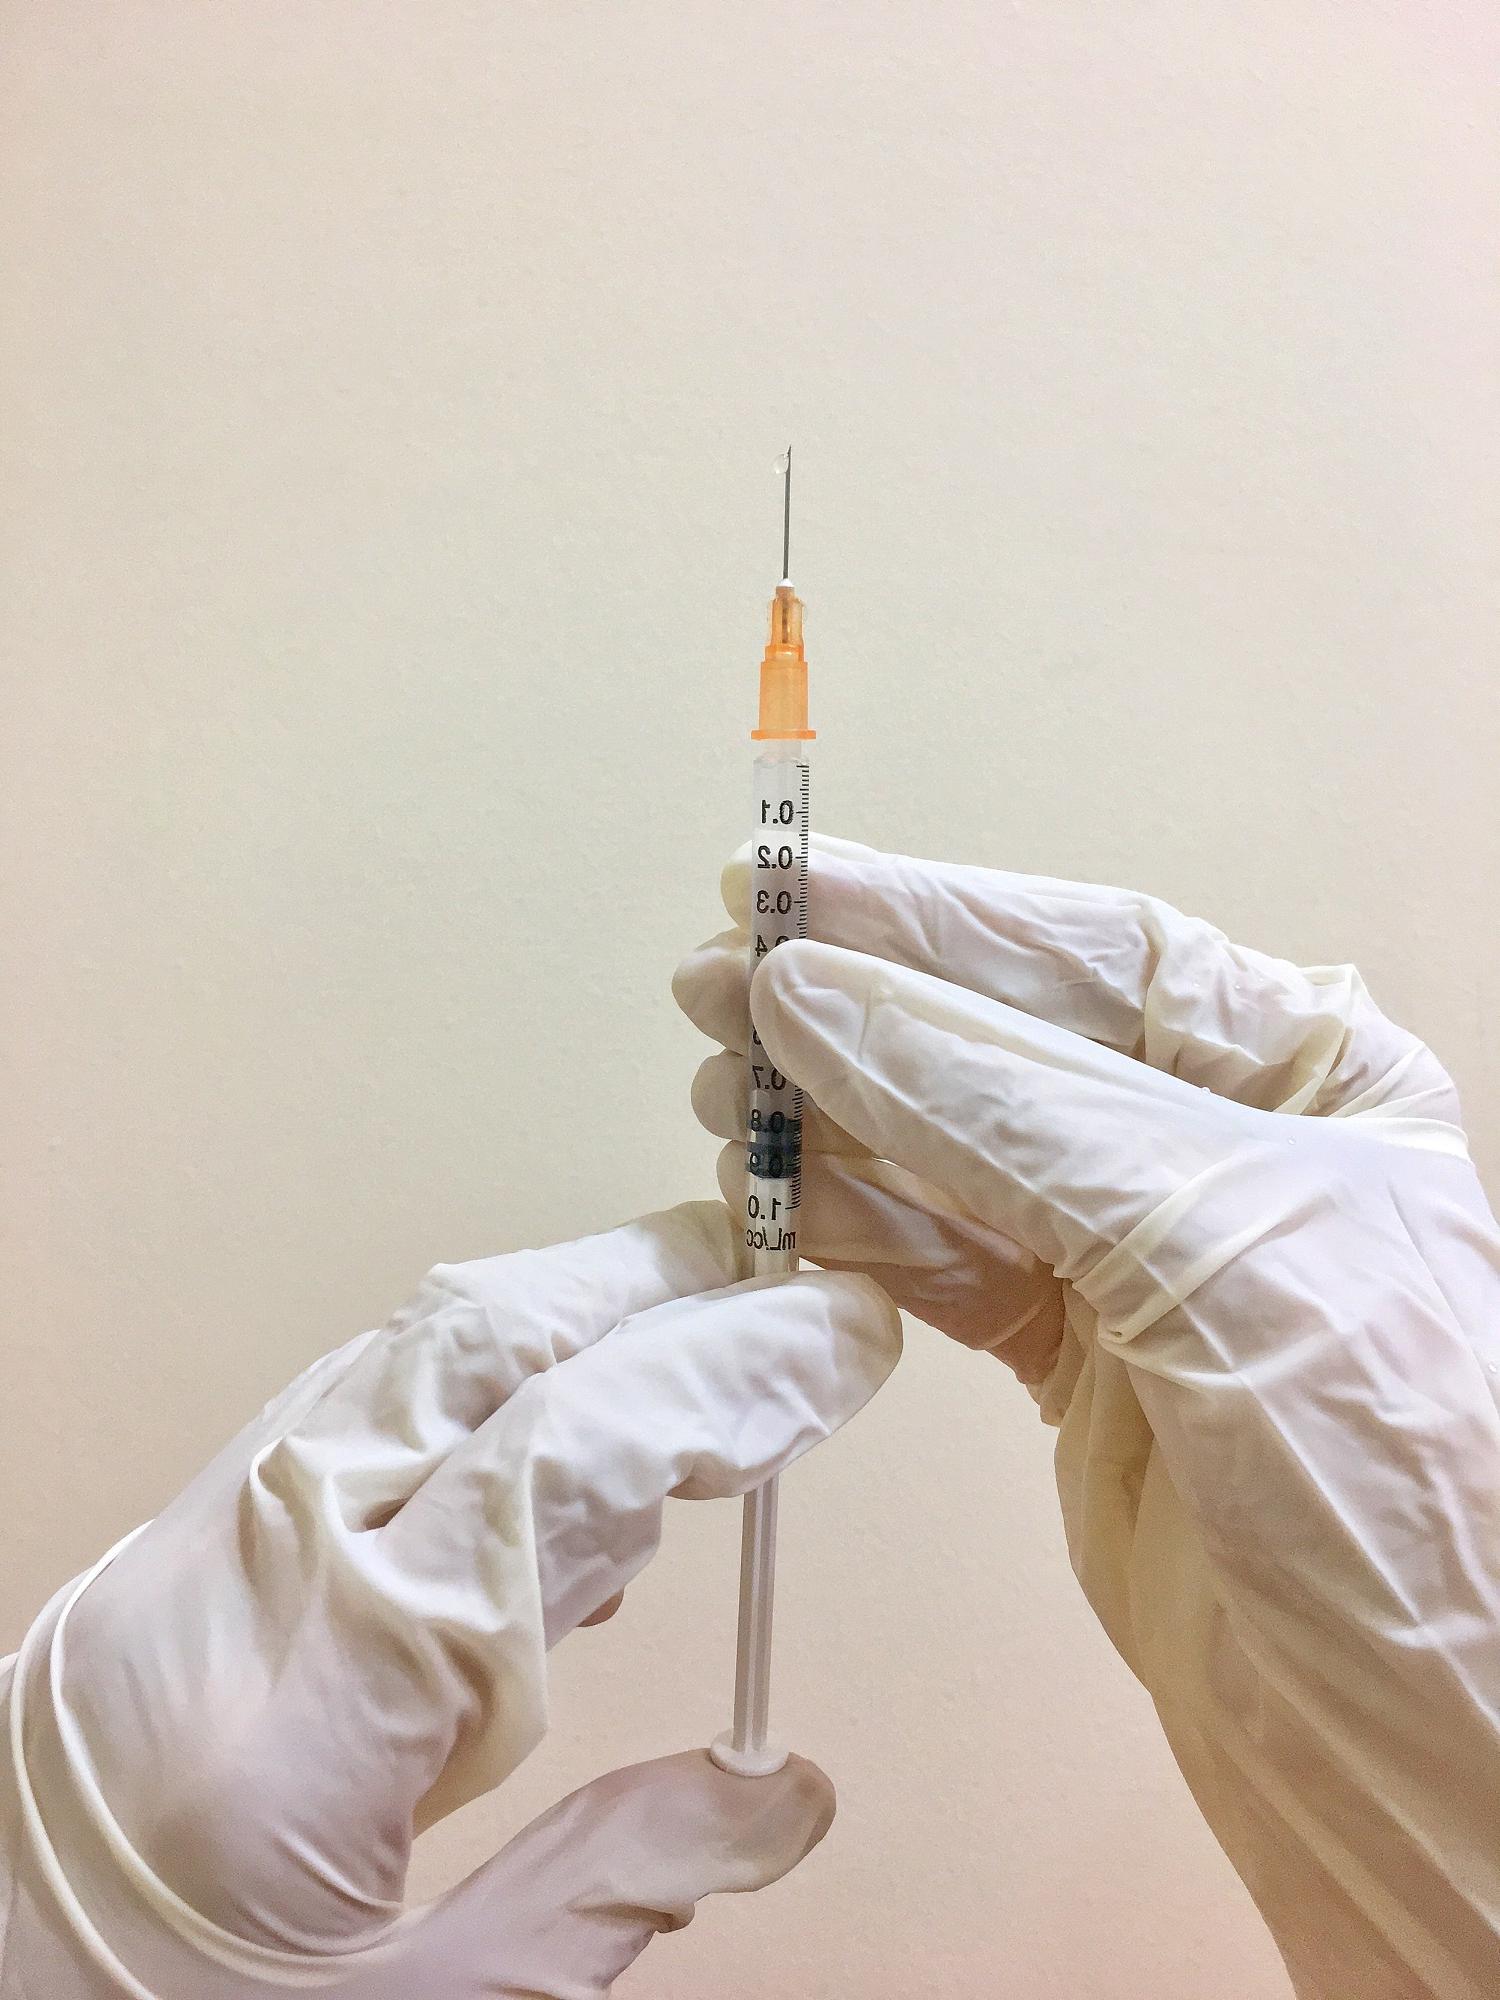 Immunization Requirements and Compliance